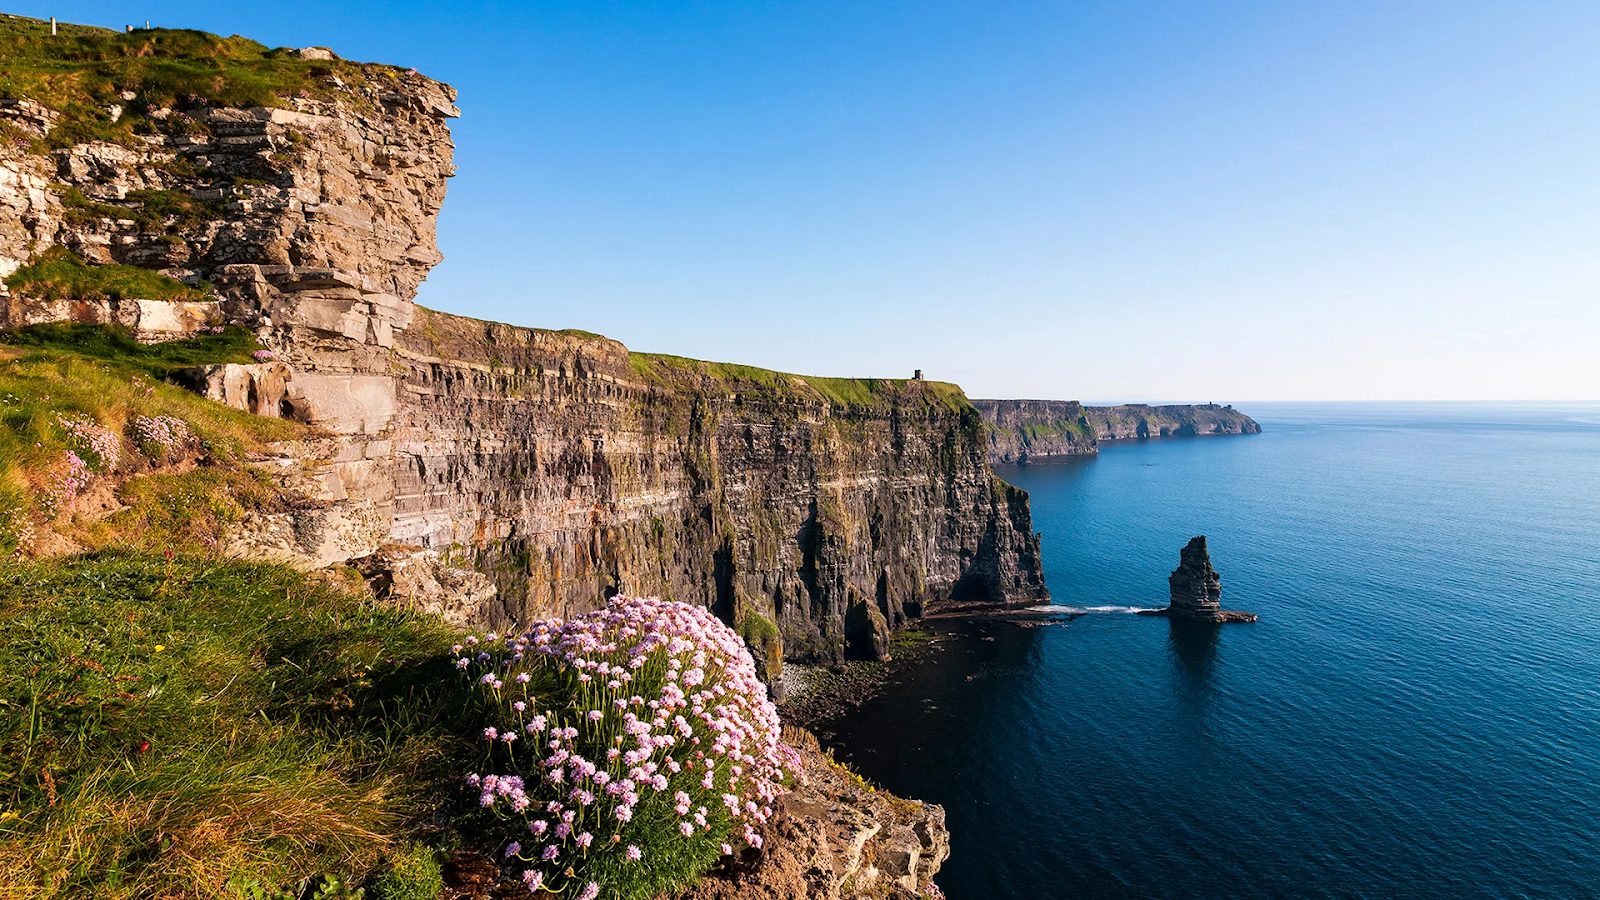 Marvel at the Cliffs of Moher